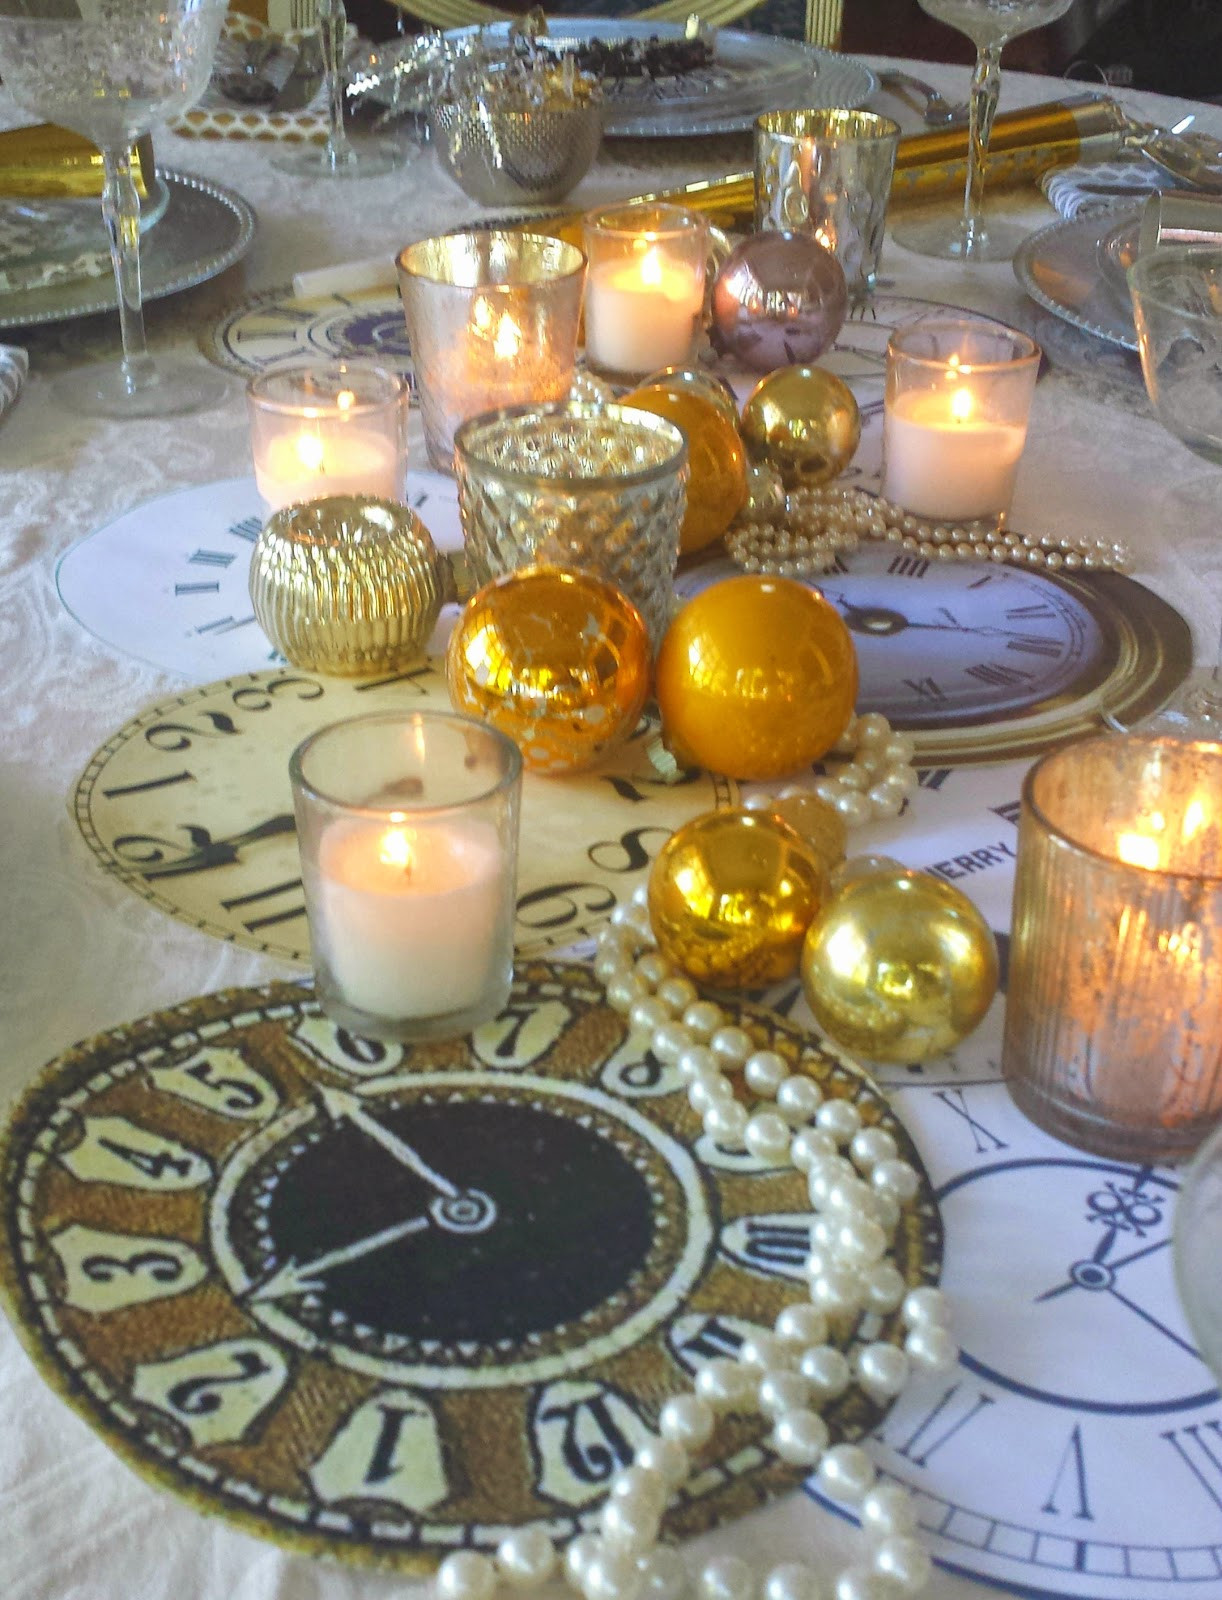 New Year Decoration Ideas
 ciao newport beach my new year s eve table